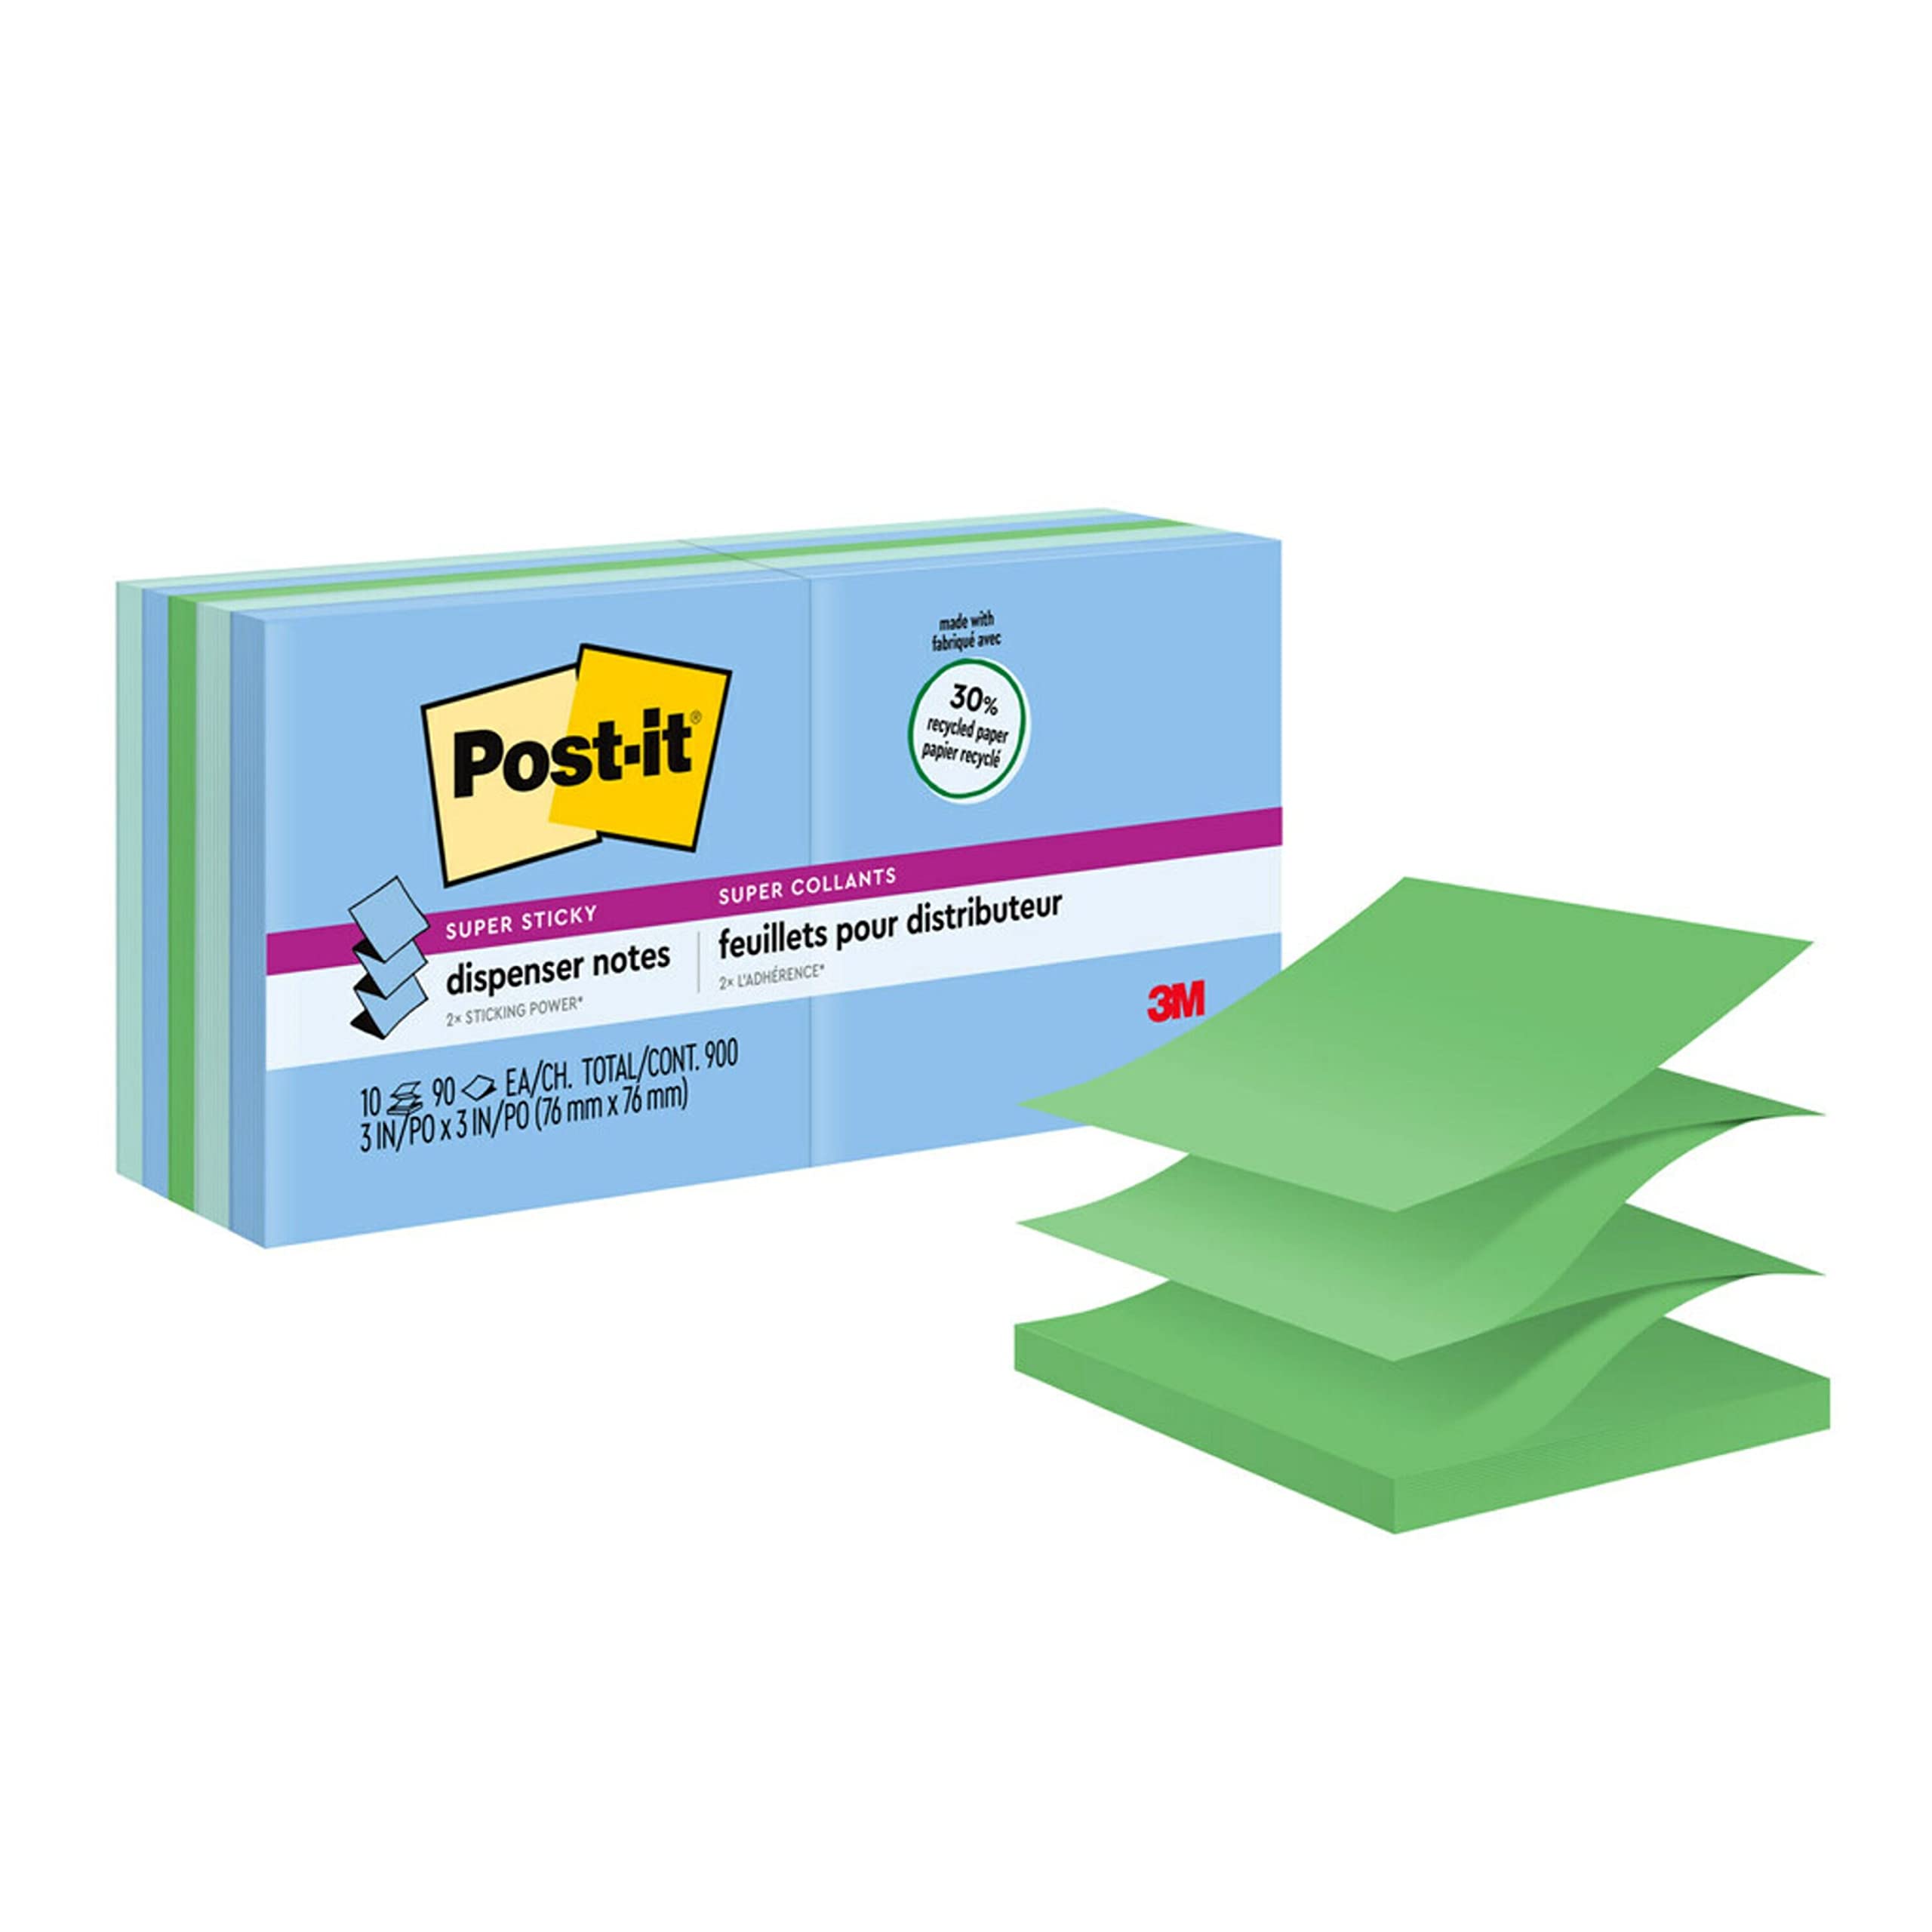 Book Cover Post-it Super Sticky Pop-up Notes, 3x3 in, 10 Pads, 2x the Sticking Power, Bora Bora Collection, Cool Colors (Green, Light Blue, Blue, Mint, Green), Recyclable (R330-10SST)